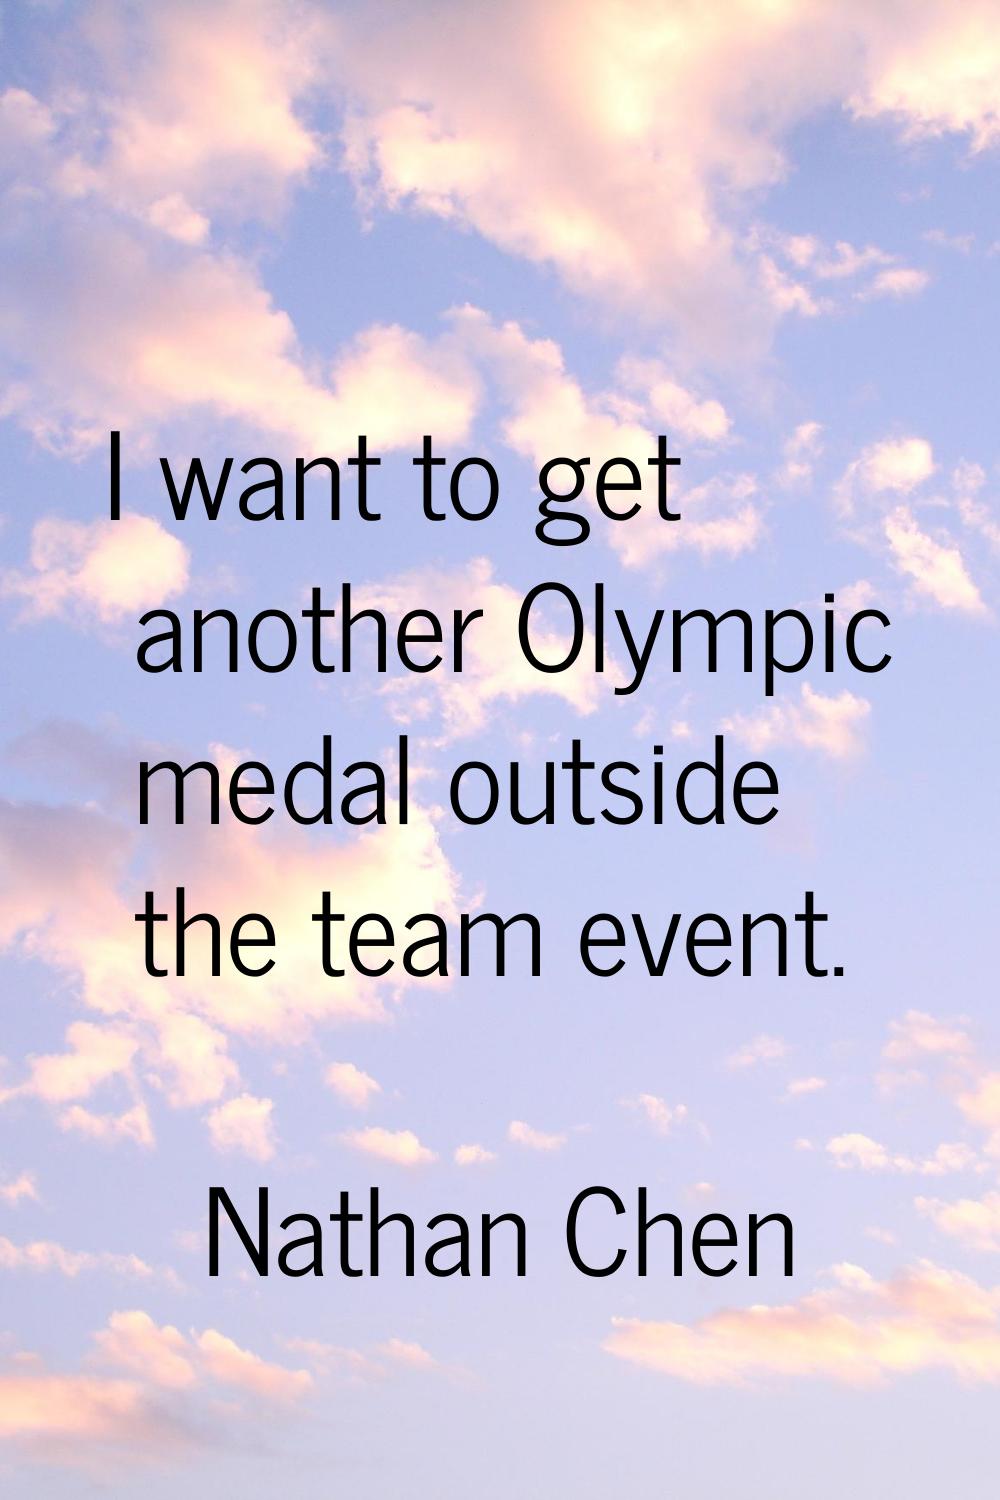 I want to get another Olympic medal outside the team event.